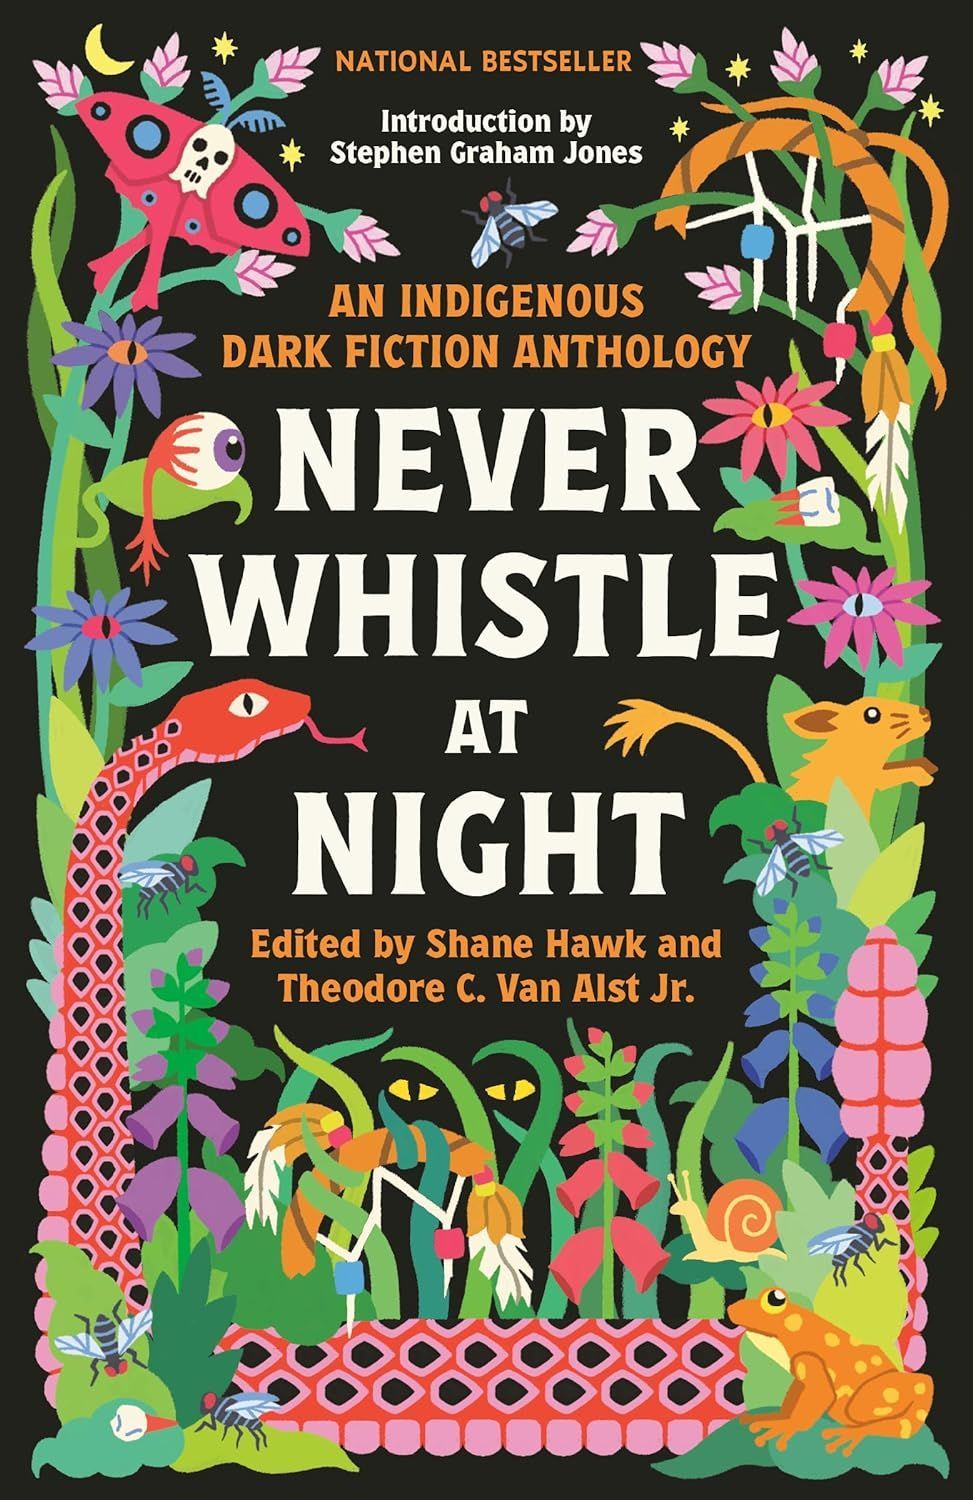 Haunted Native America: On Theodore C. Van Alst Jr. and Shane Hawk’s “Never Whistle at Night”